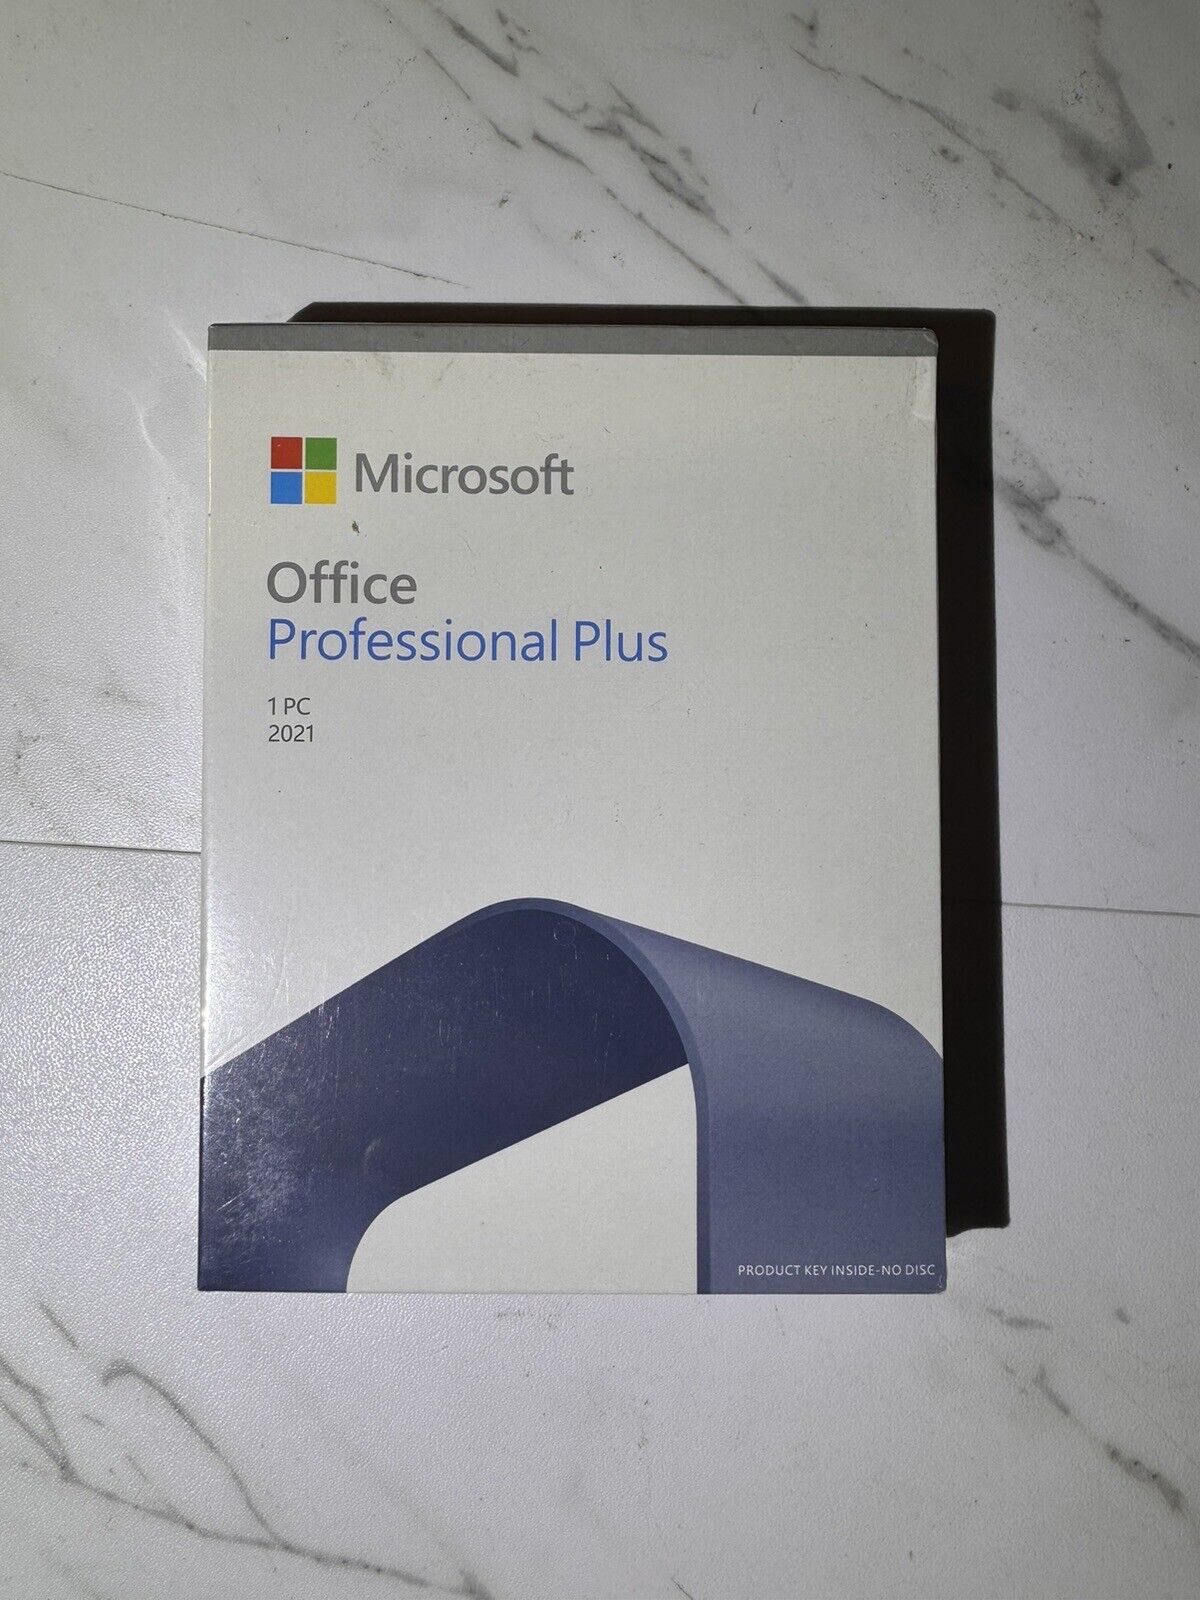 Microsoft Office 2021 Professional Plus - USB - New Sealed Retail Package